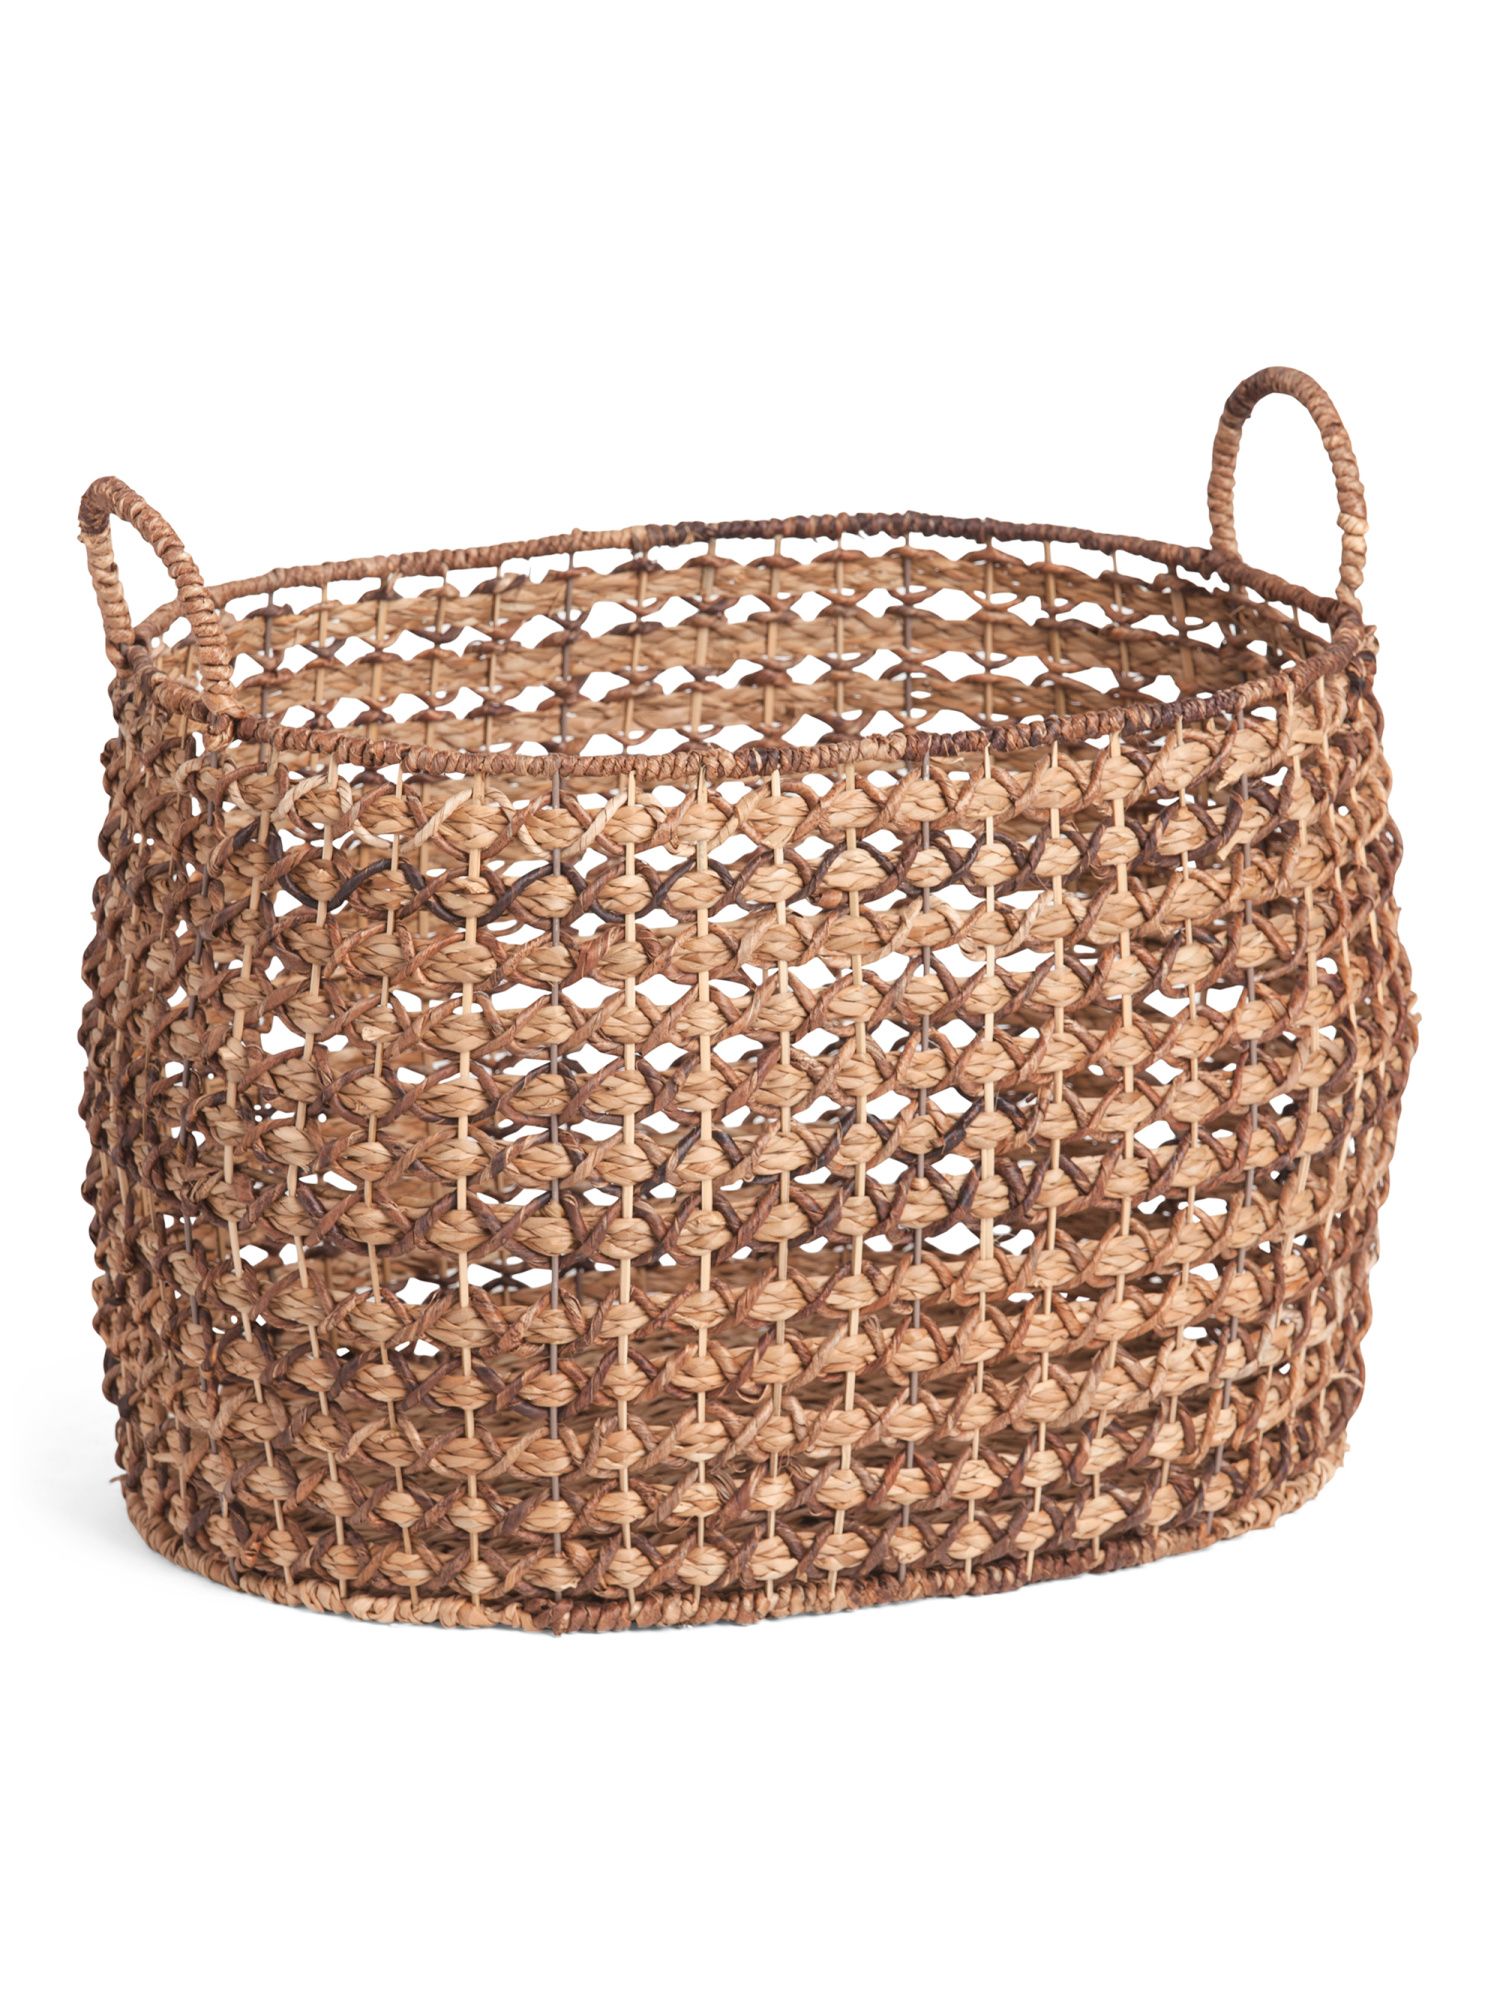 Medium X Weave And Braided Weave Bloated Oval Basket | TJ Maxx